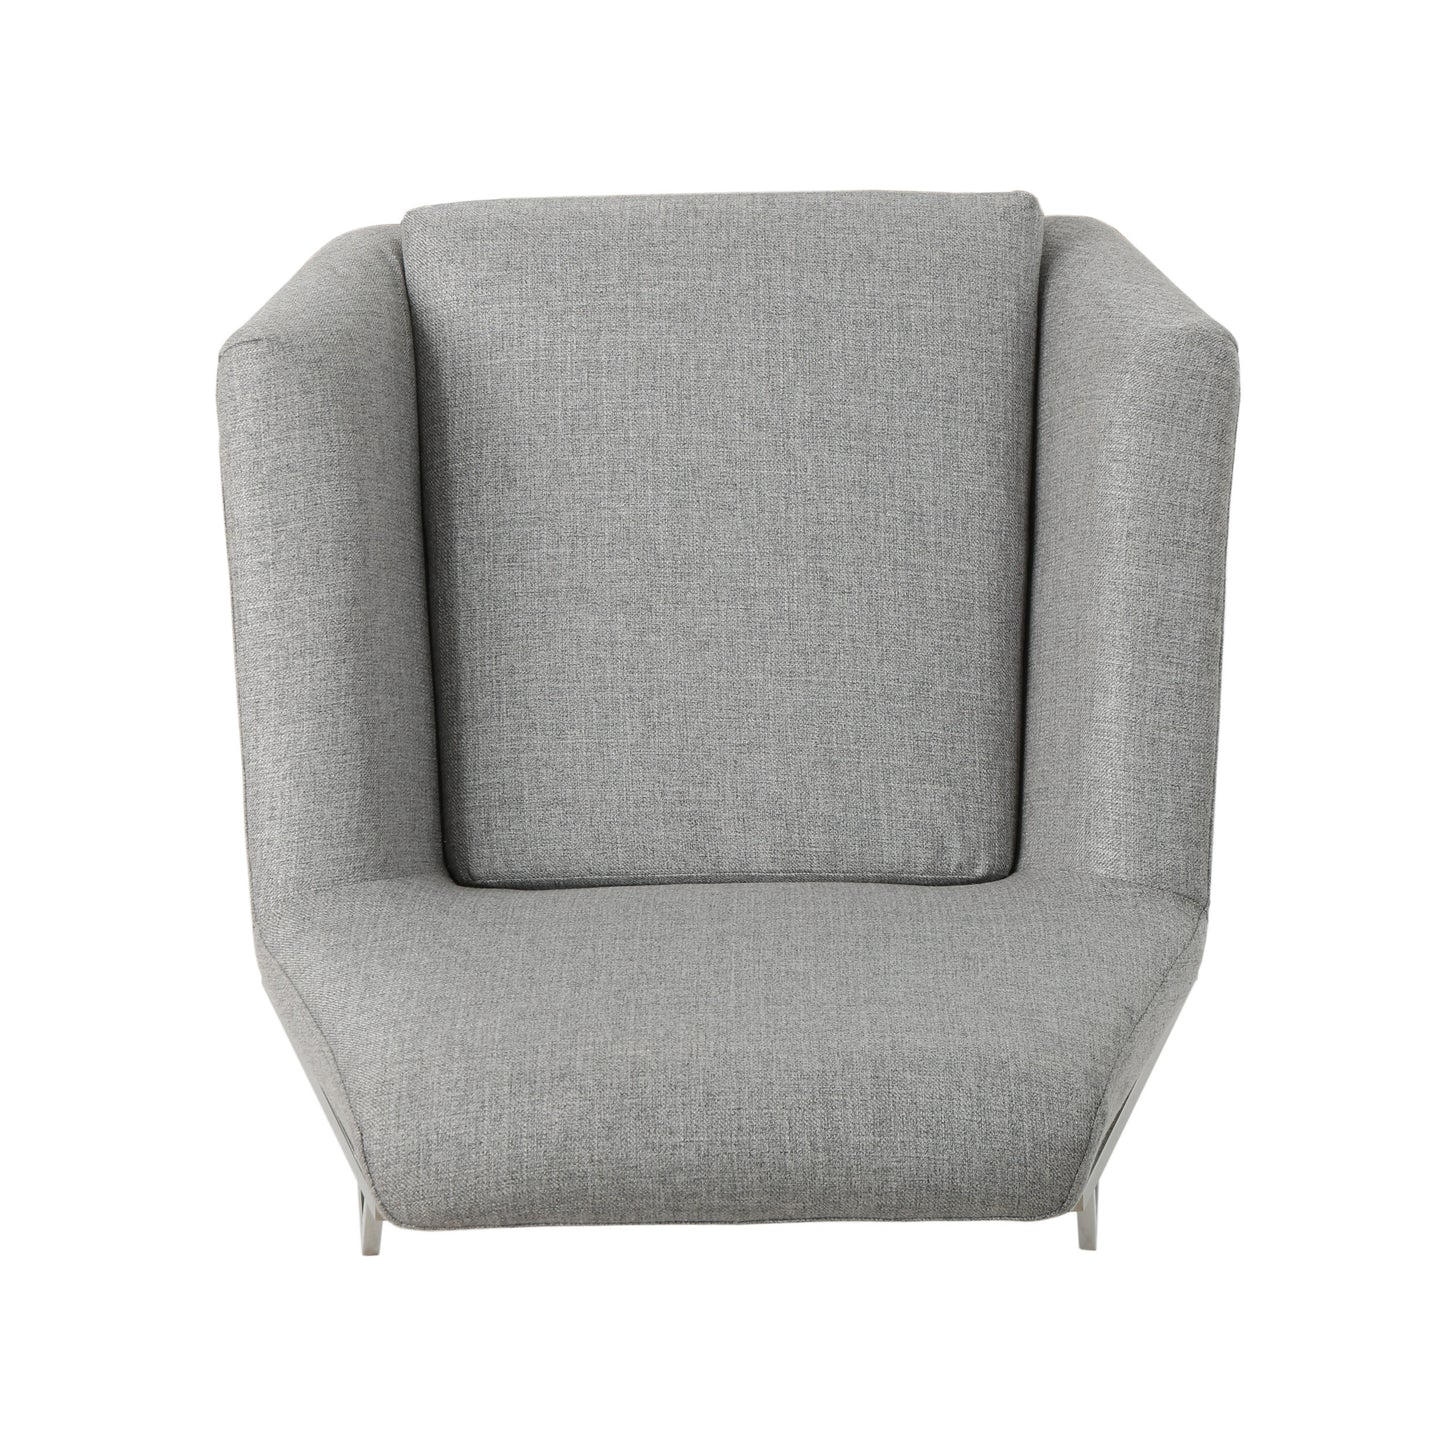 Zach Modern Stainless Steel Frame Fabric Accent Chair